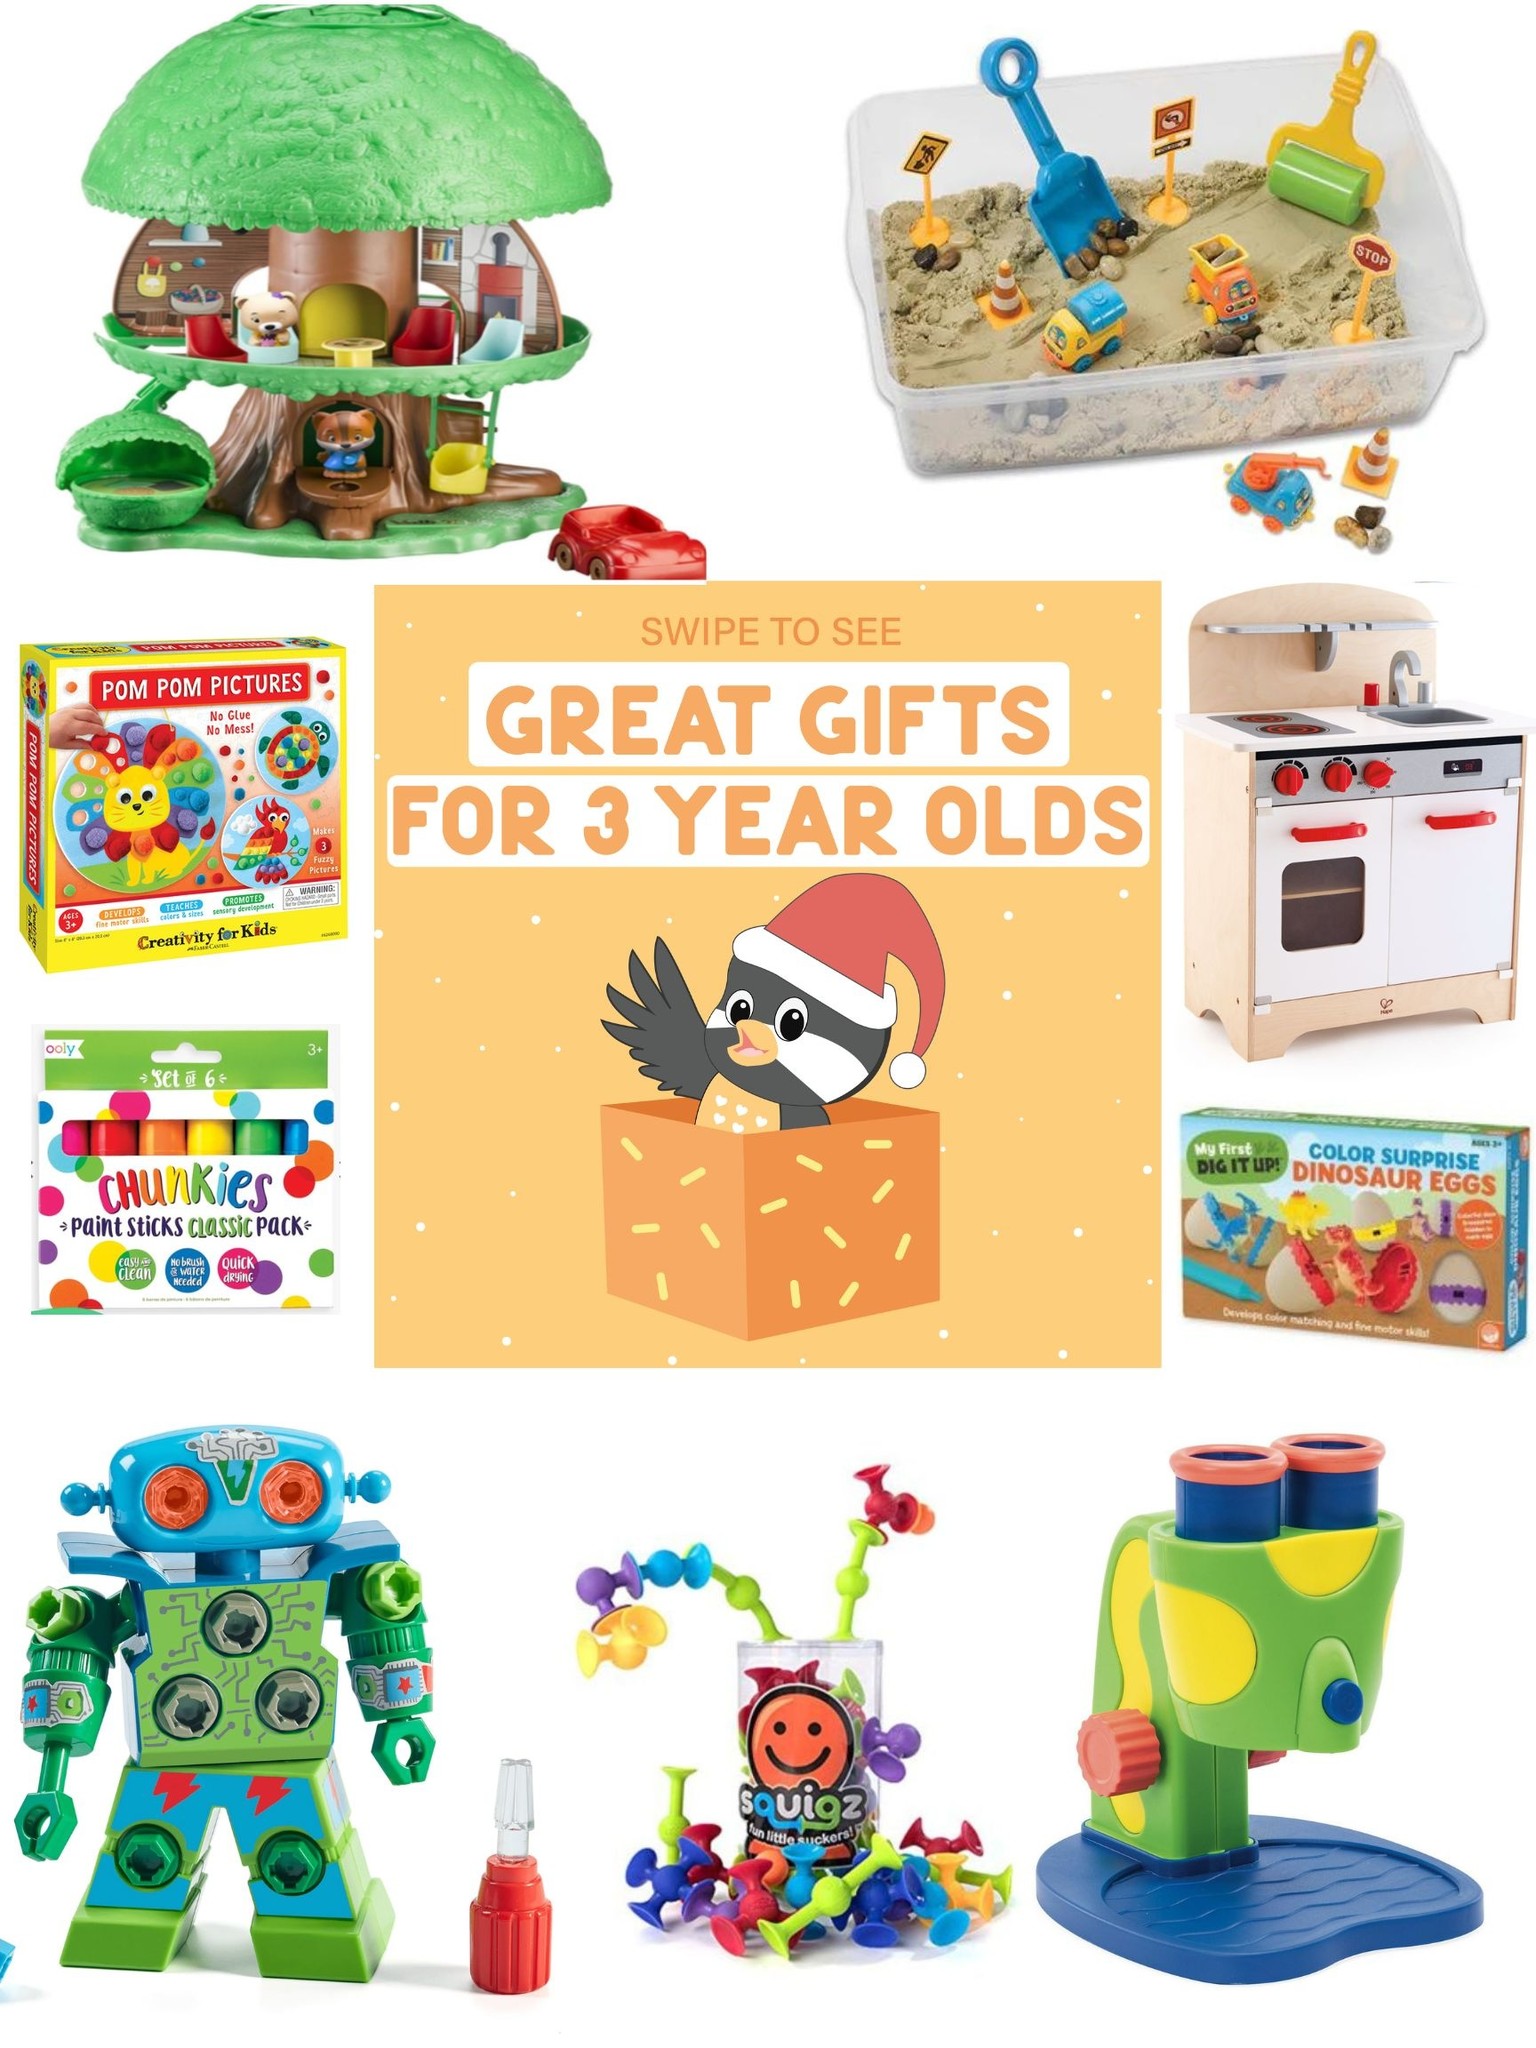 Holiday Gift Guide: Great Gifts for 3 Year Olds